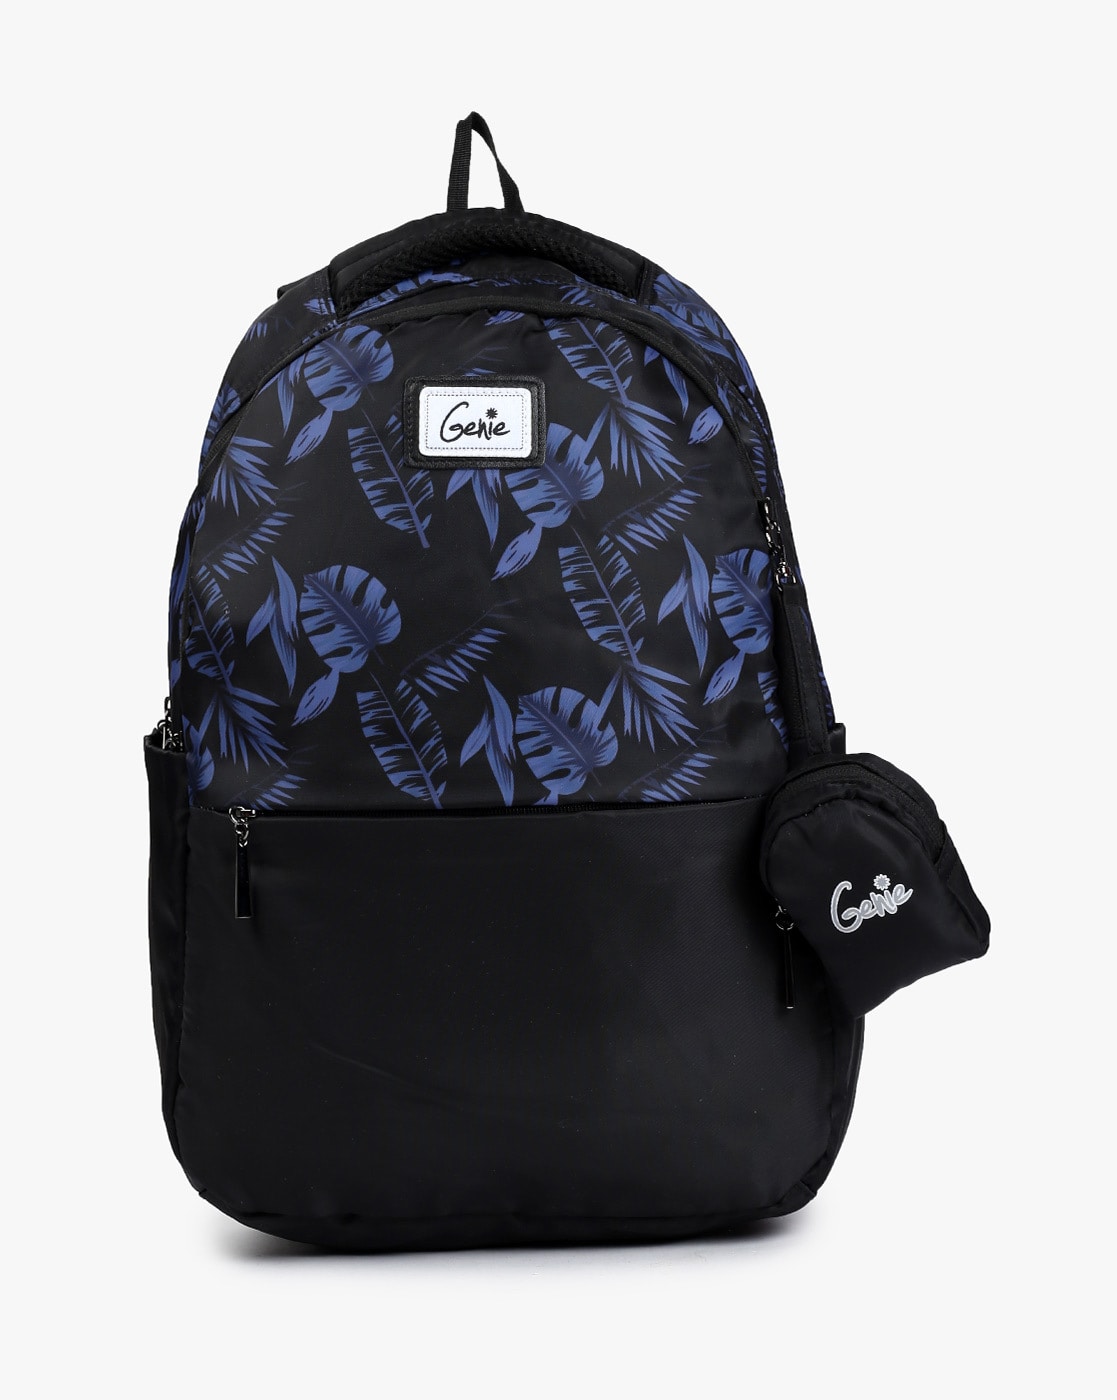 Buy Latest Backpacks Luggage Bags Travel Bags College Bags Hand Bags in  Chennai Online at Best Price  Roshan Bags